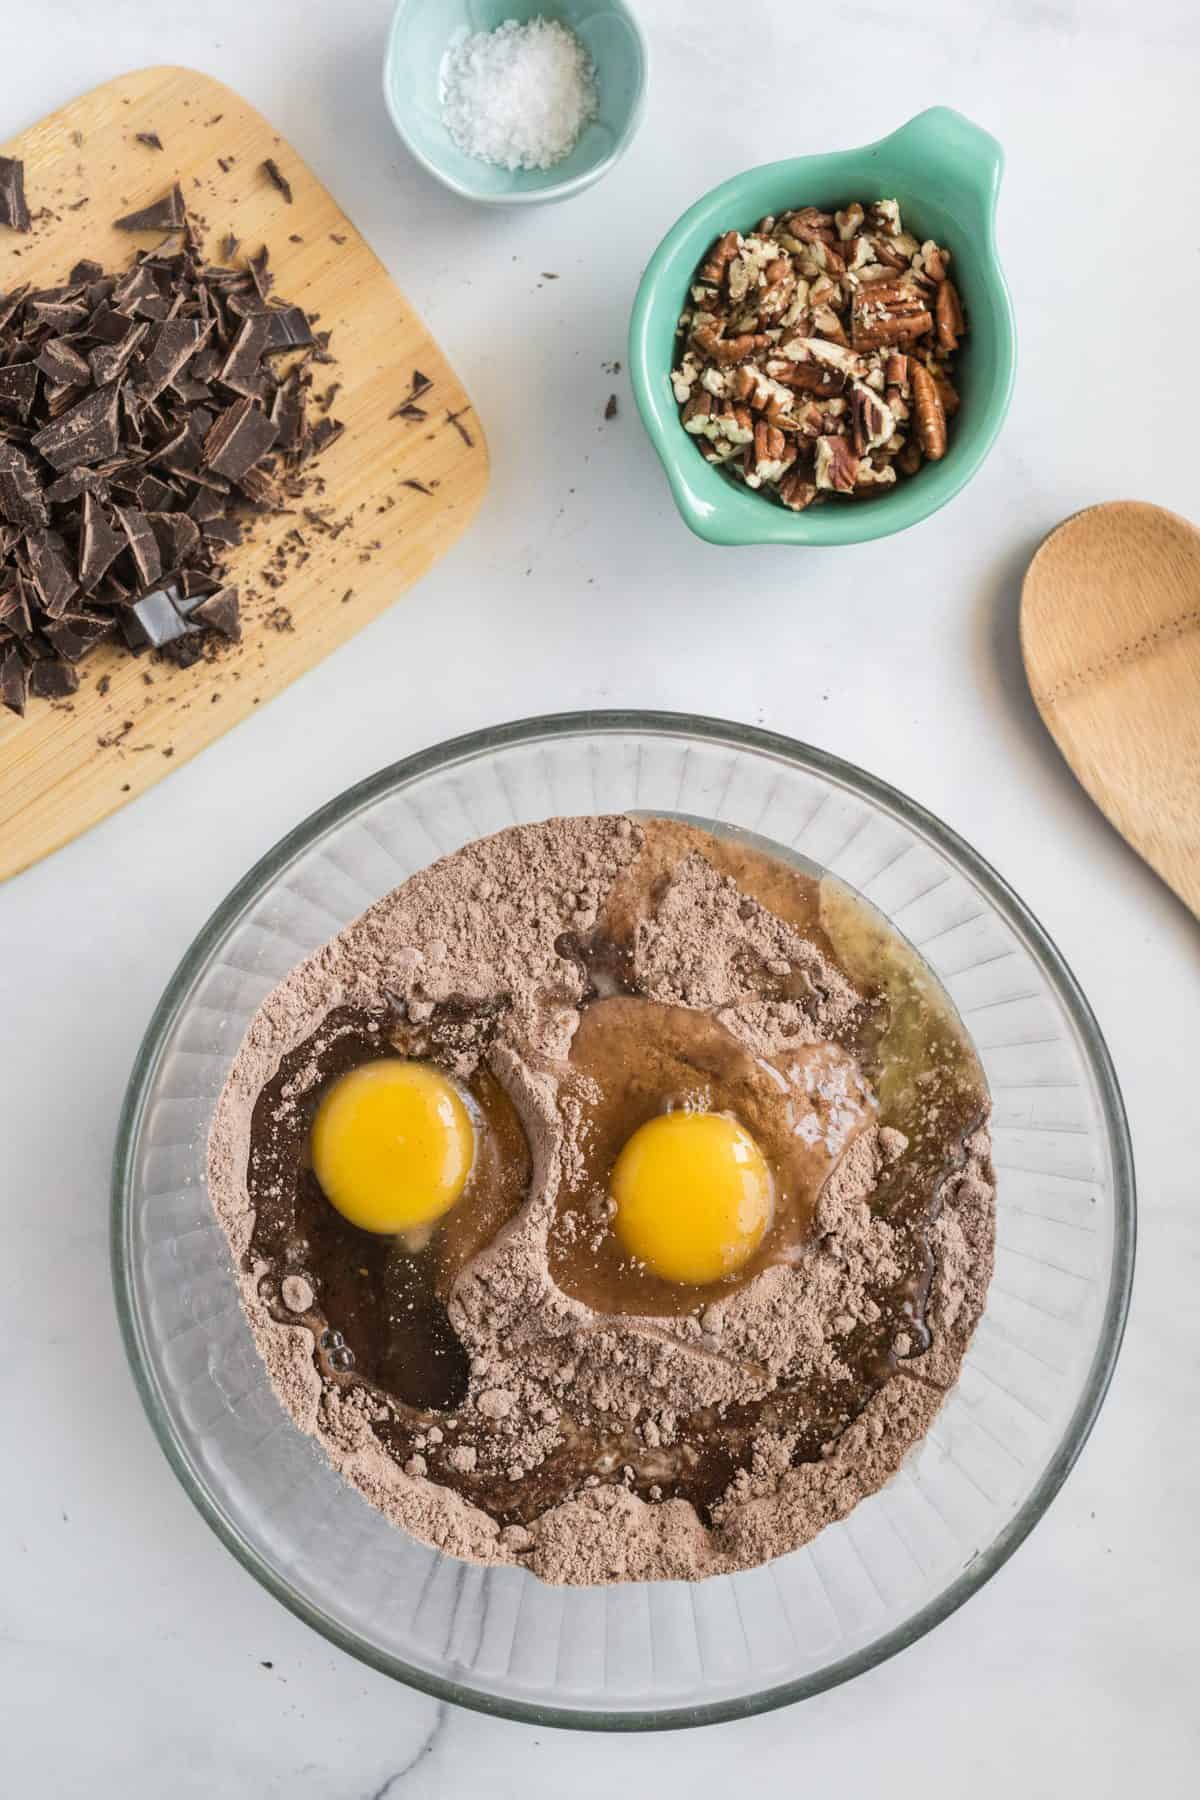 Cake mix and eggs in a large glass bowl with chocolate and pecans in smaller bowls.